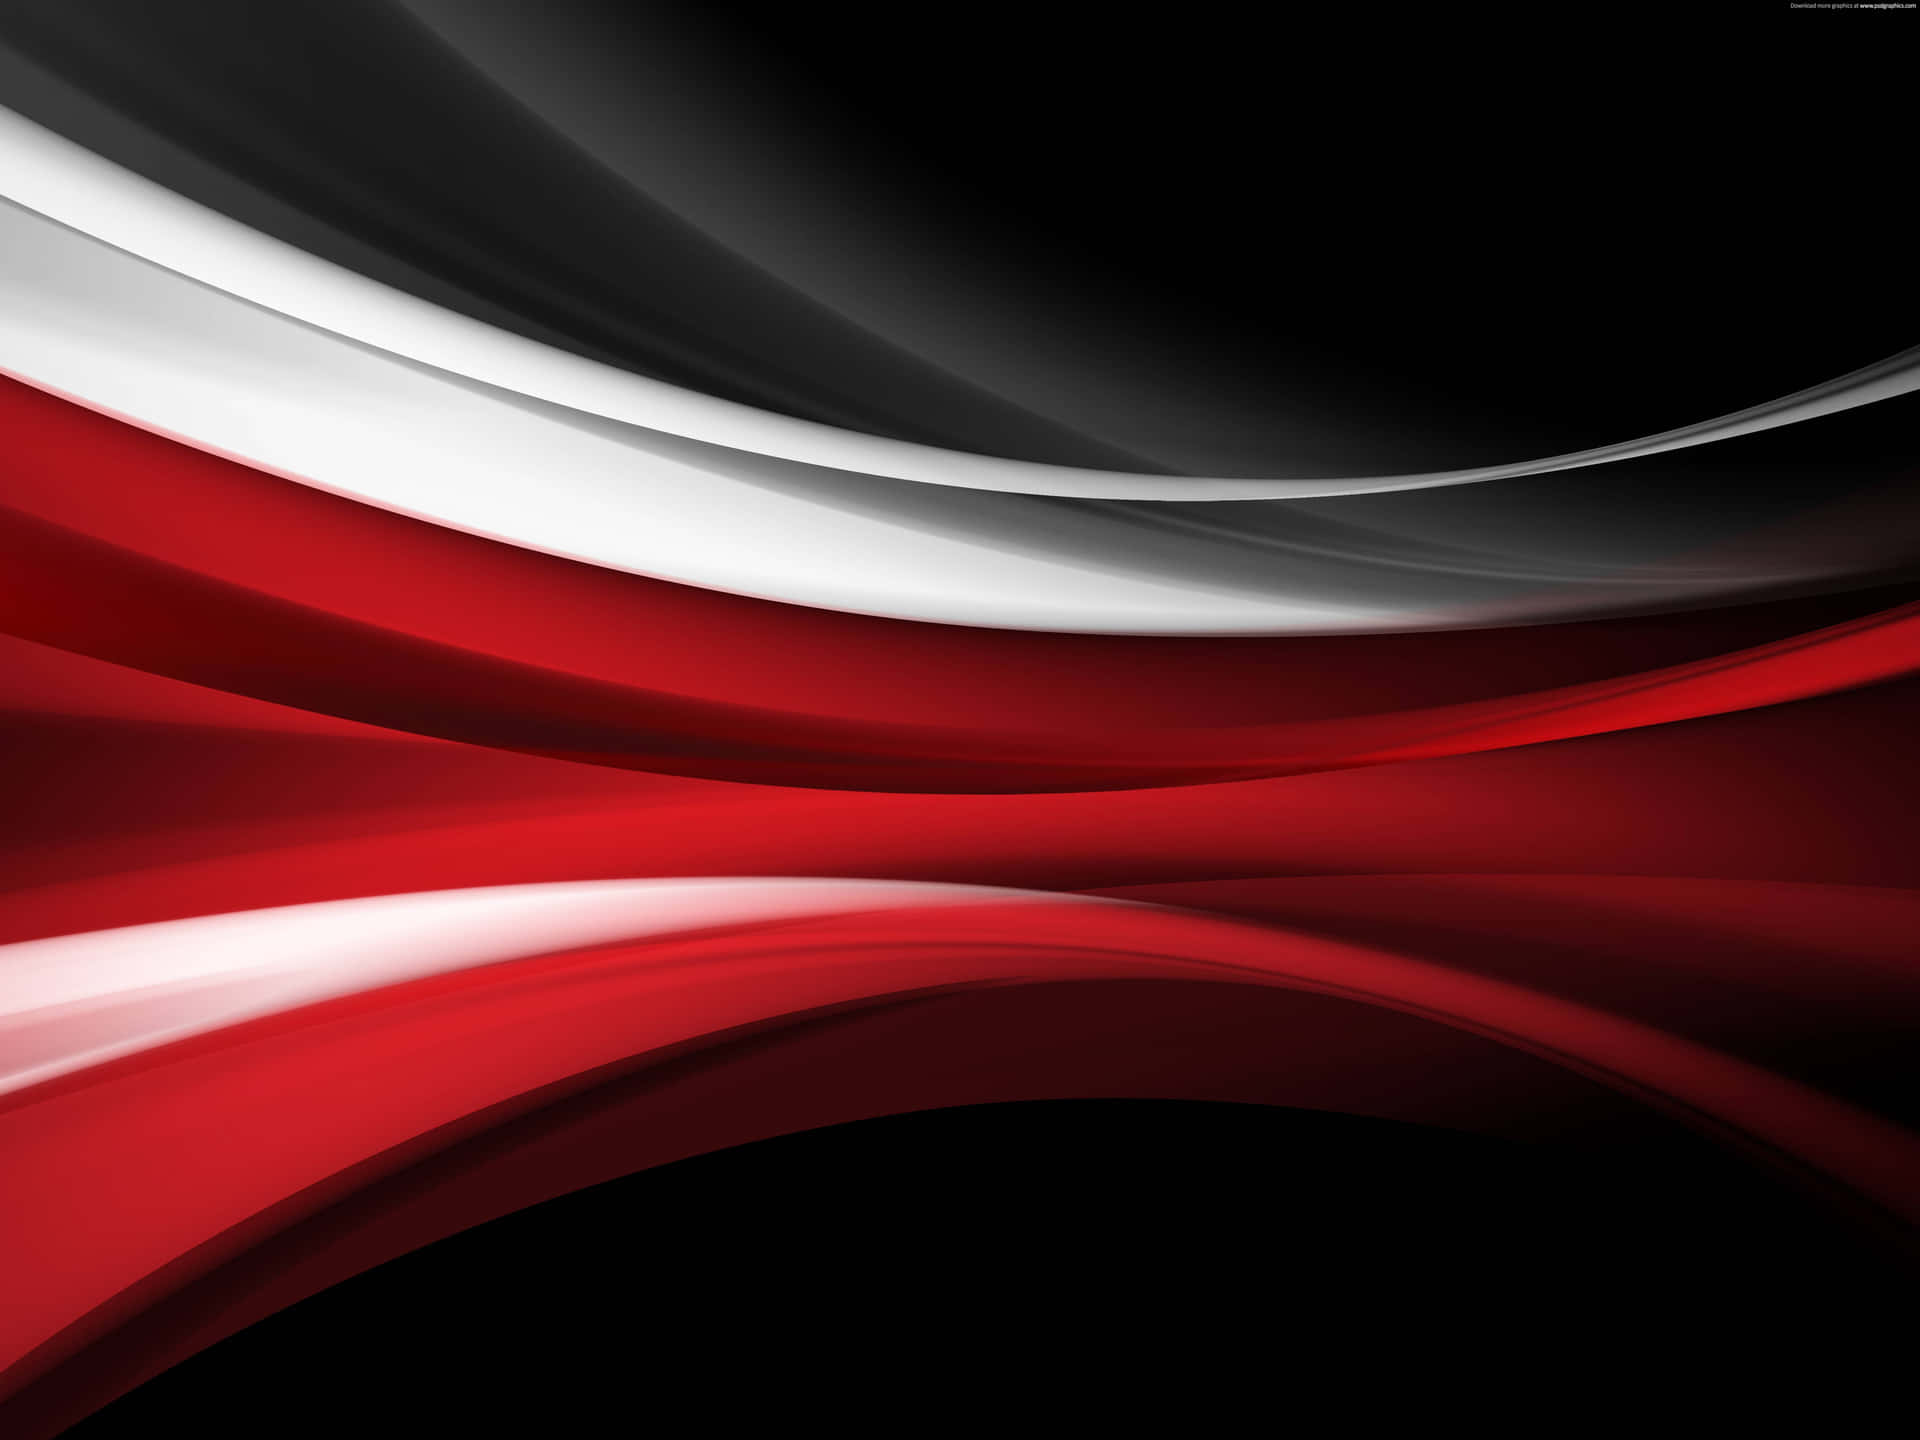 A Dramatic Abstract Pattern of Black and Red